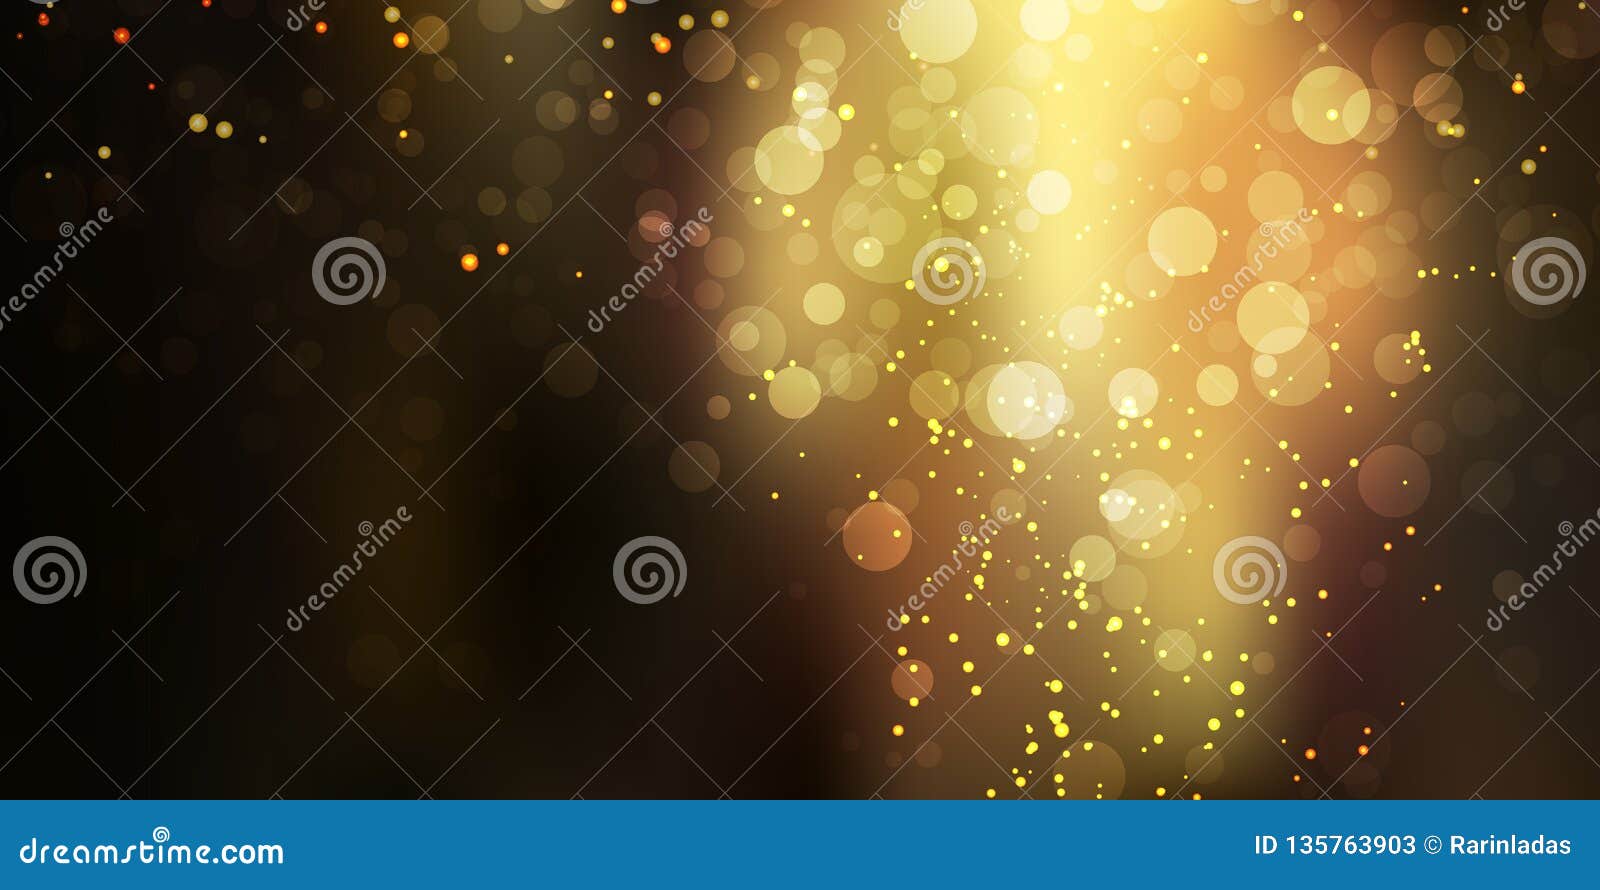 gold glittering sparkle stardust on black background with bokeh lights